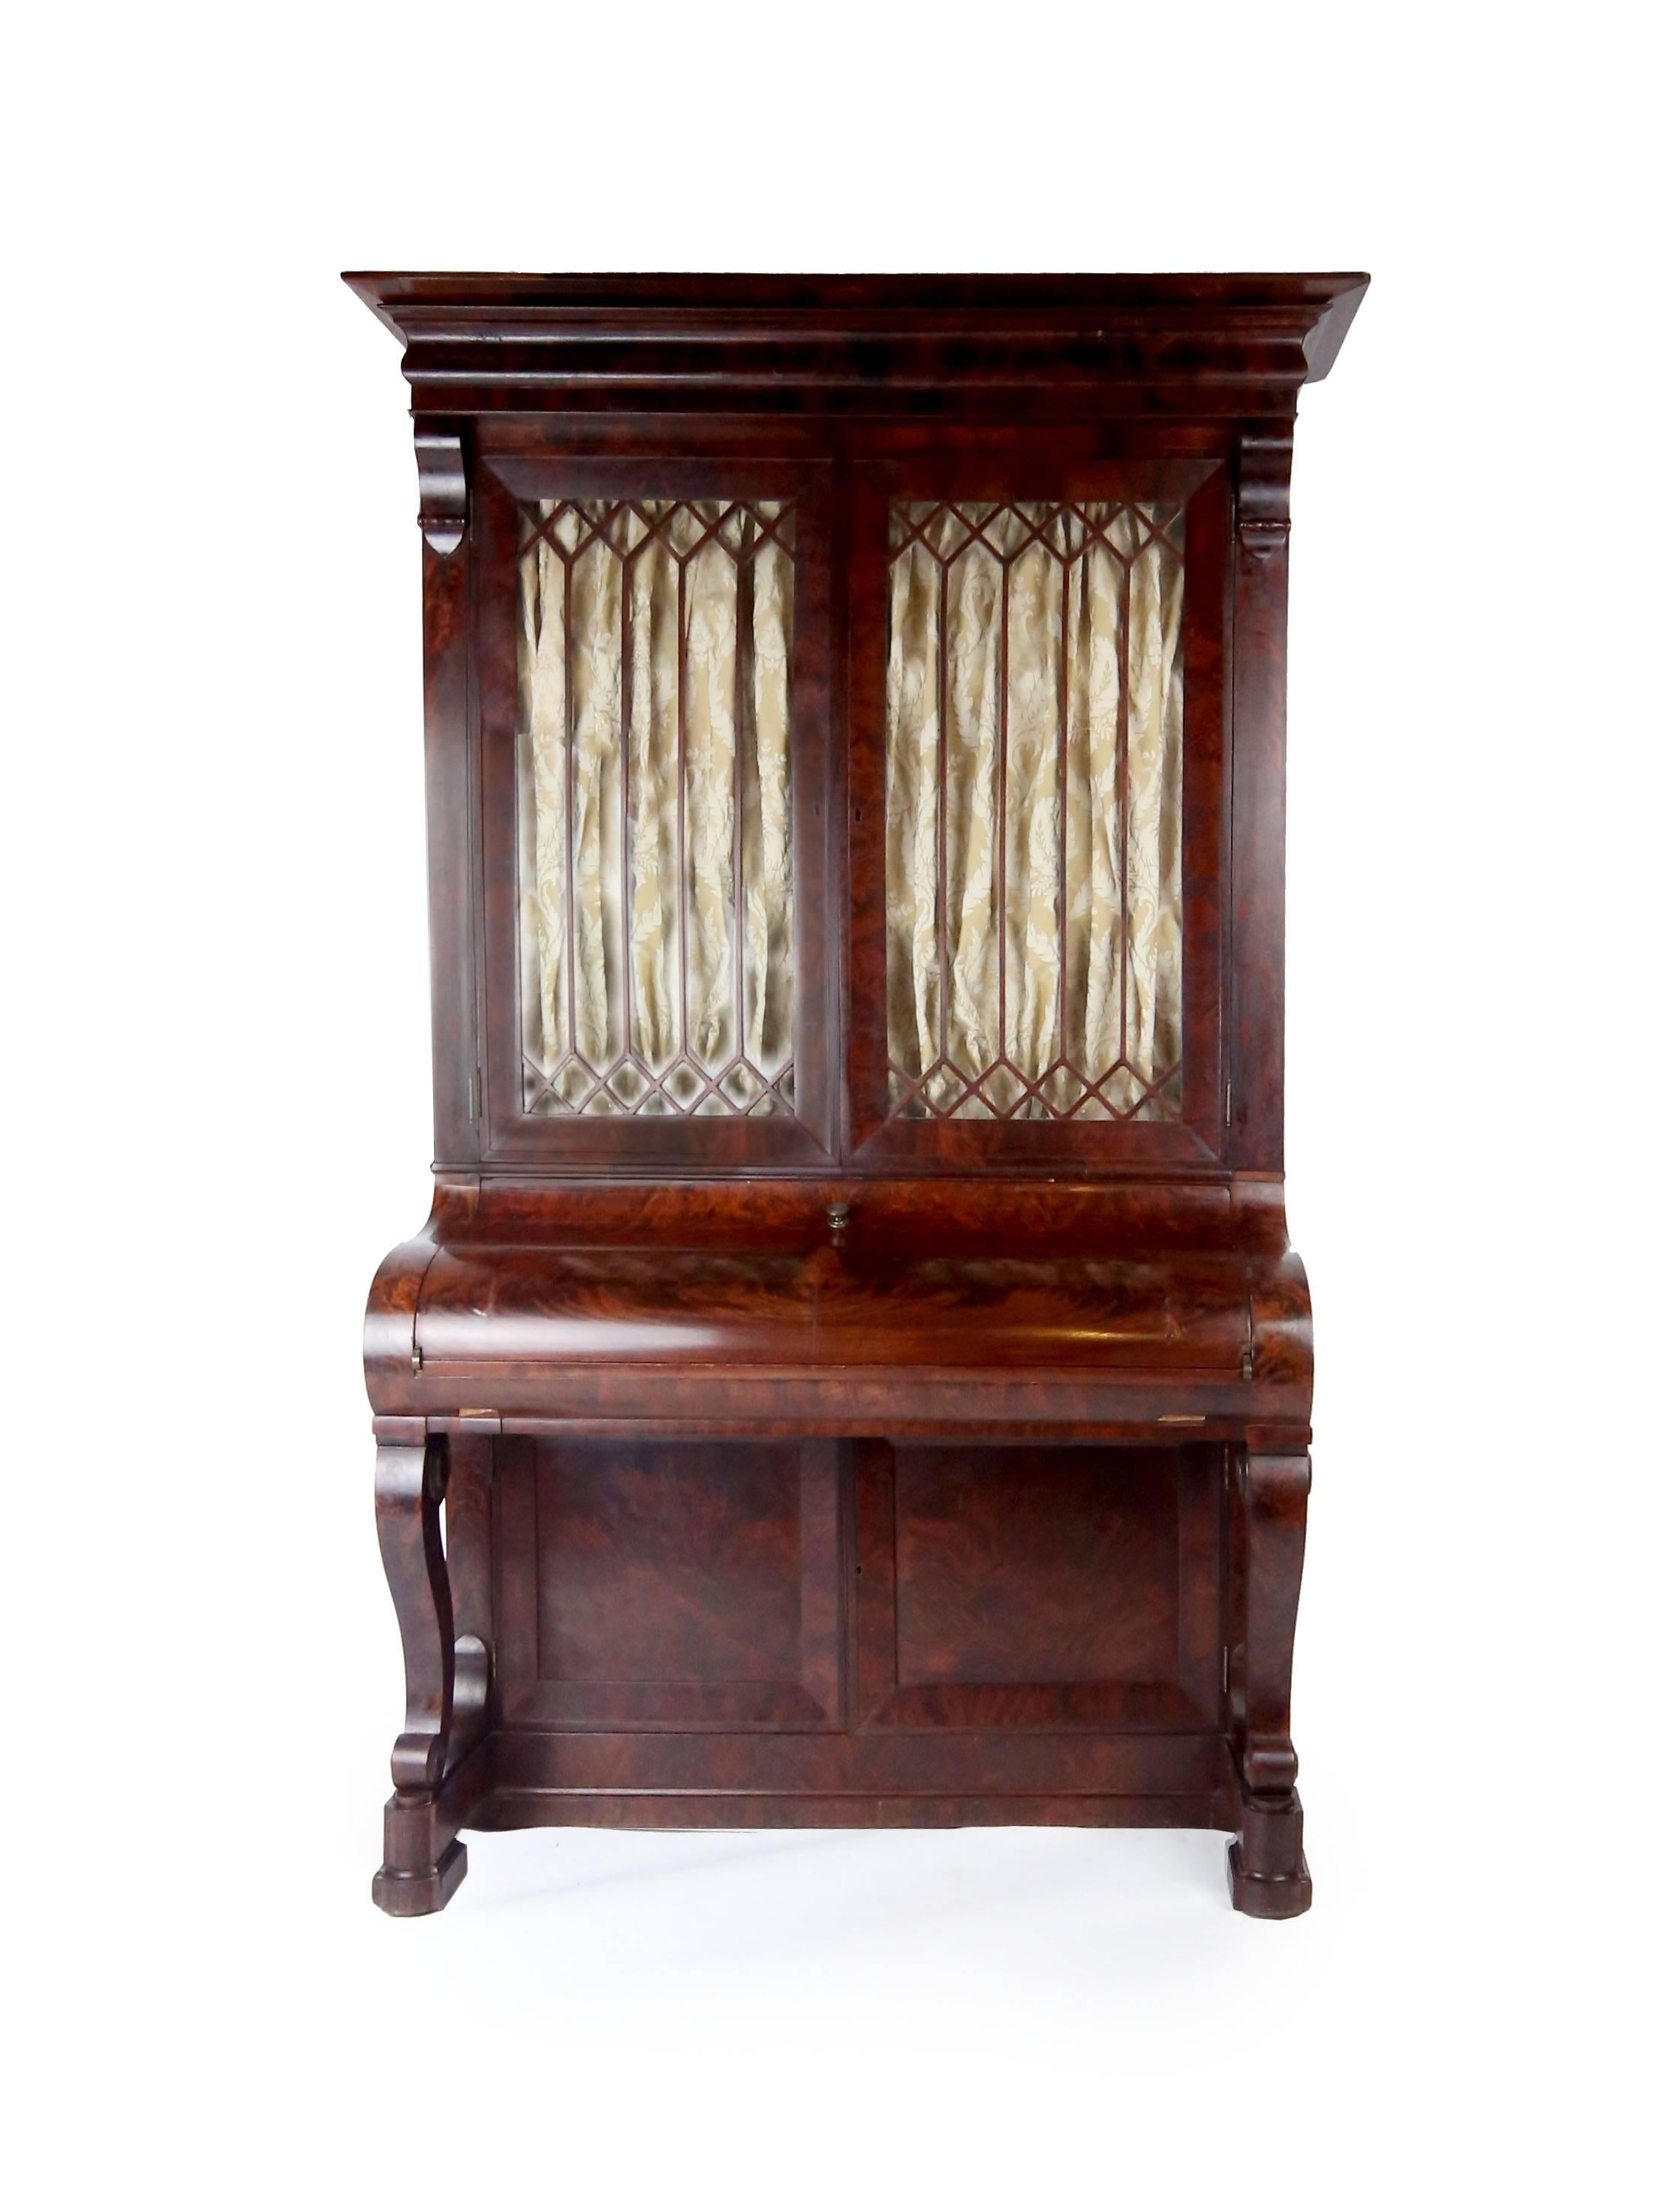 An important piece of American furniture, from the shop of Duncan Phyfe, circa 1840. To quote Duncan Phyfe: Master cabinetmaker in New York, 2011 (Kenny, Brown). 

